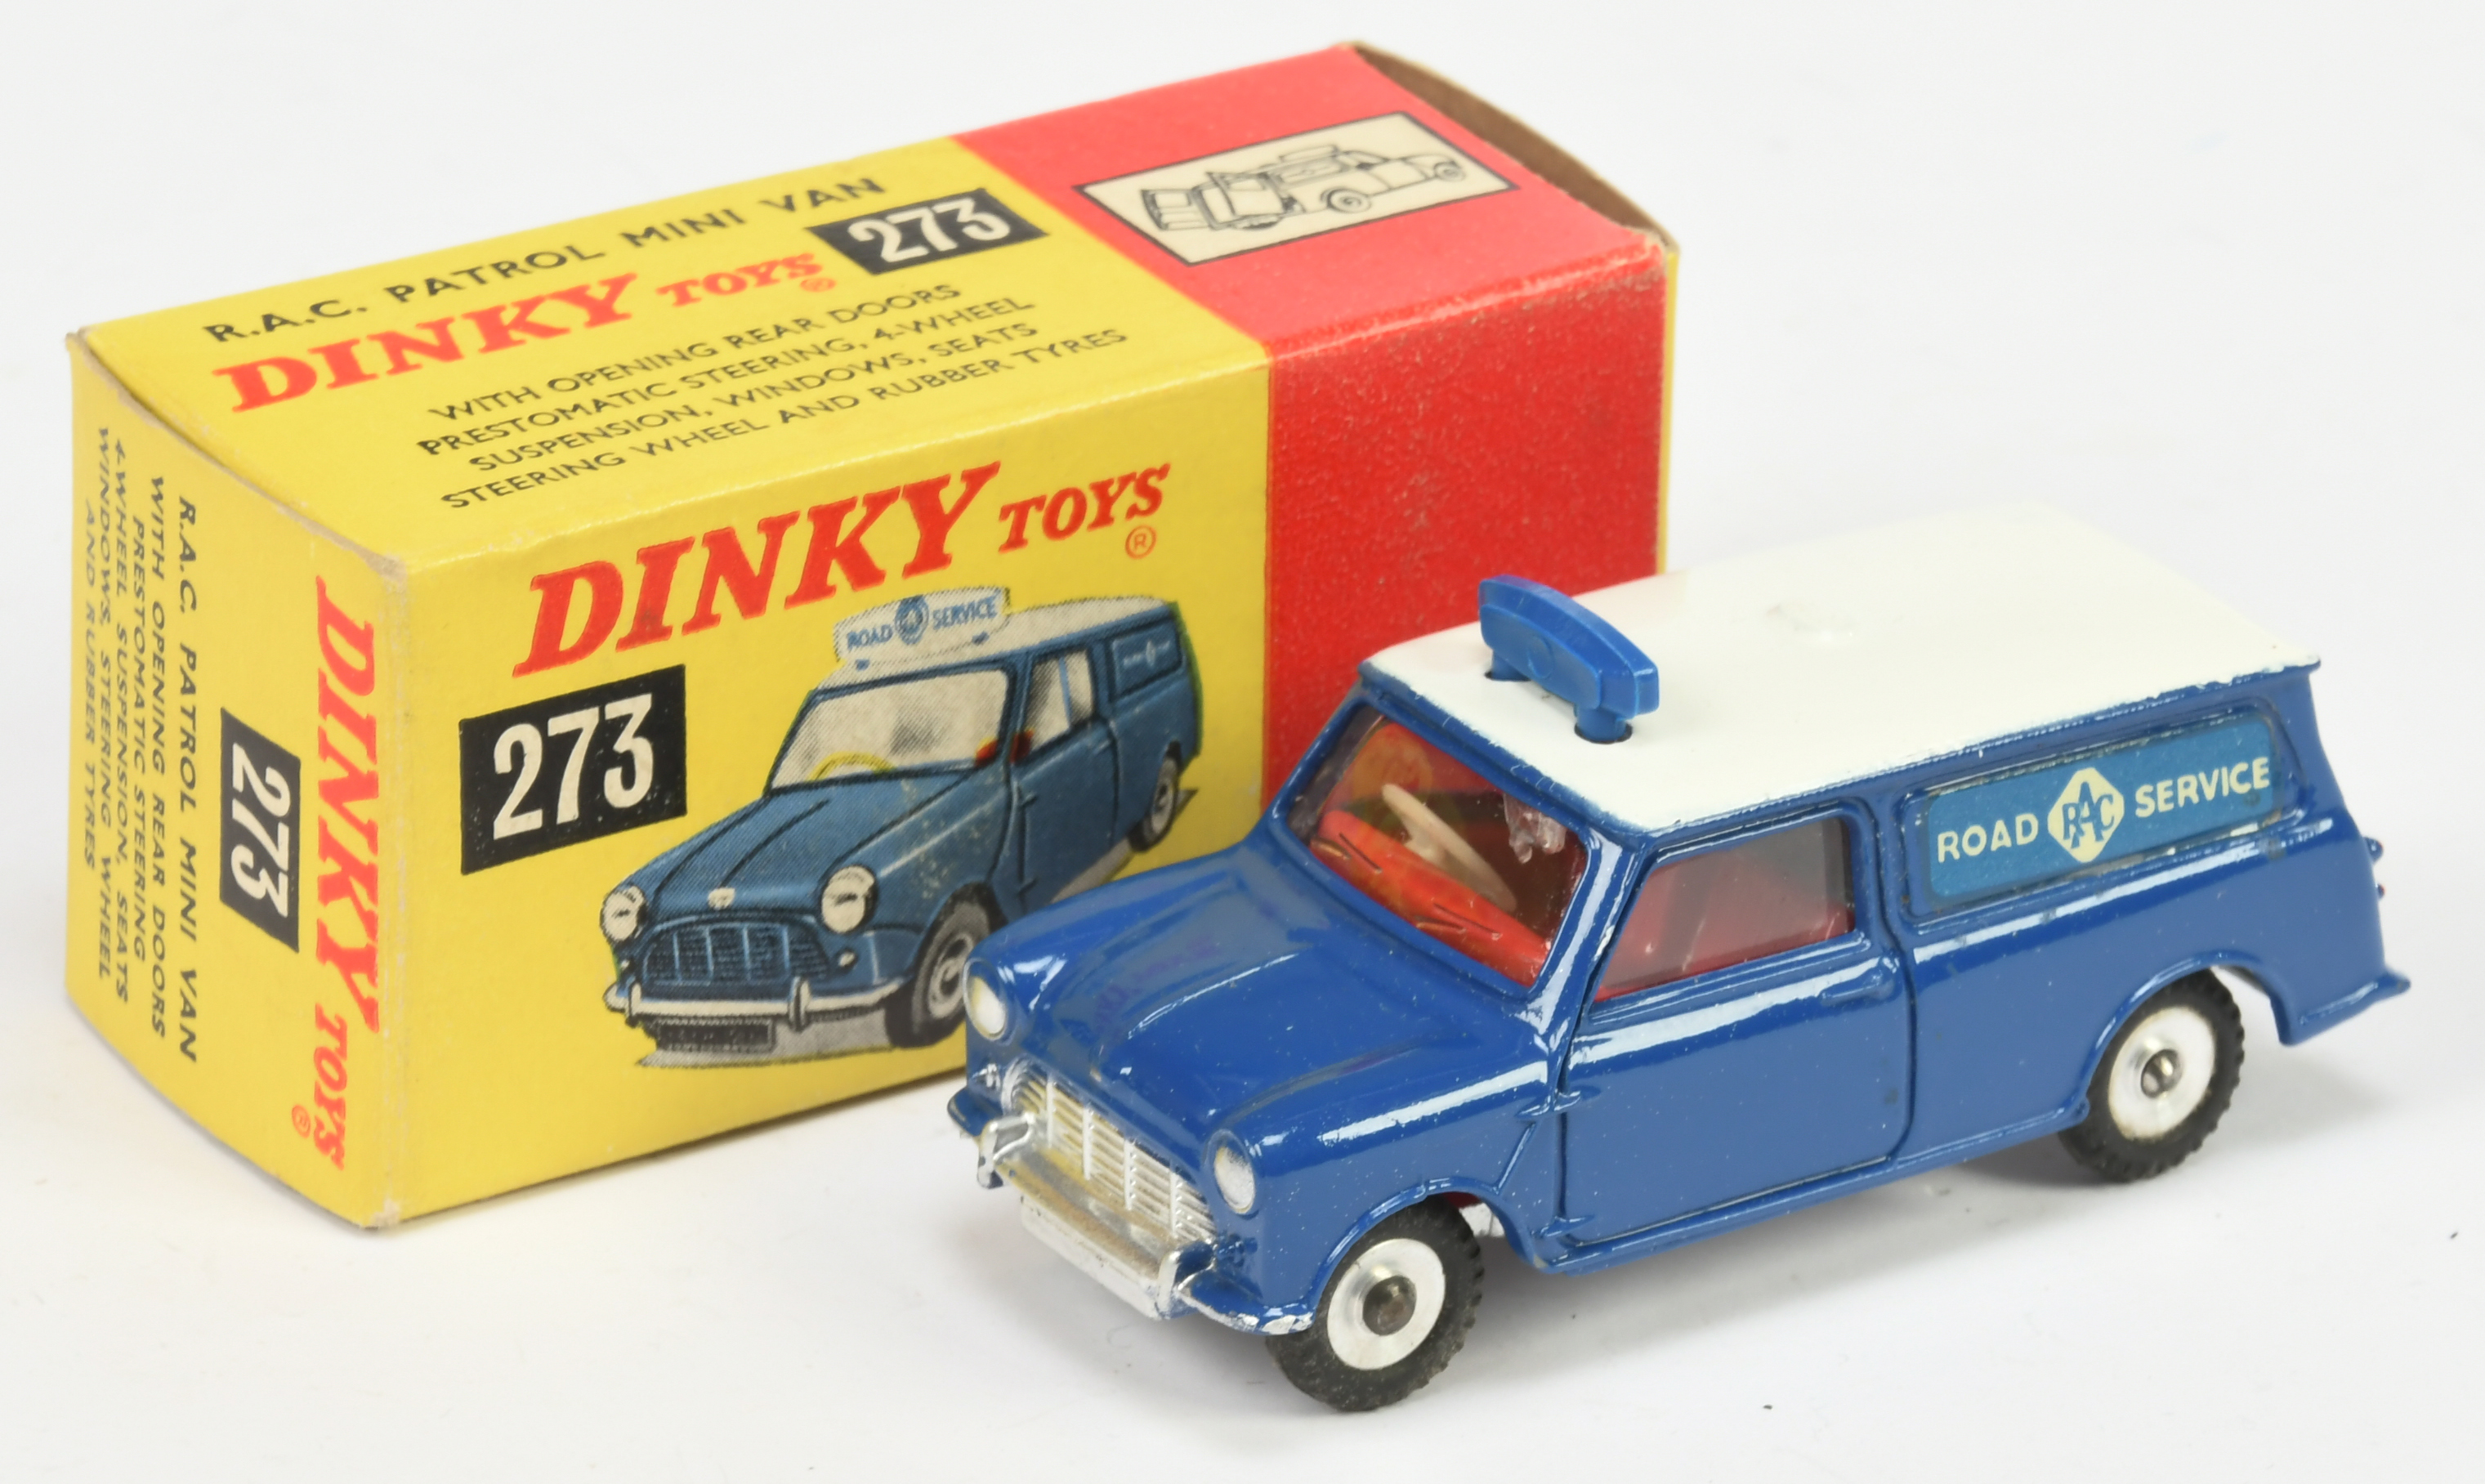 Dinky Toys 273 "RAC Road Service" Mini Van - Blue body and roof sign, white roof, red interior, s...